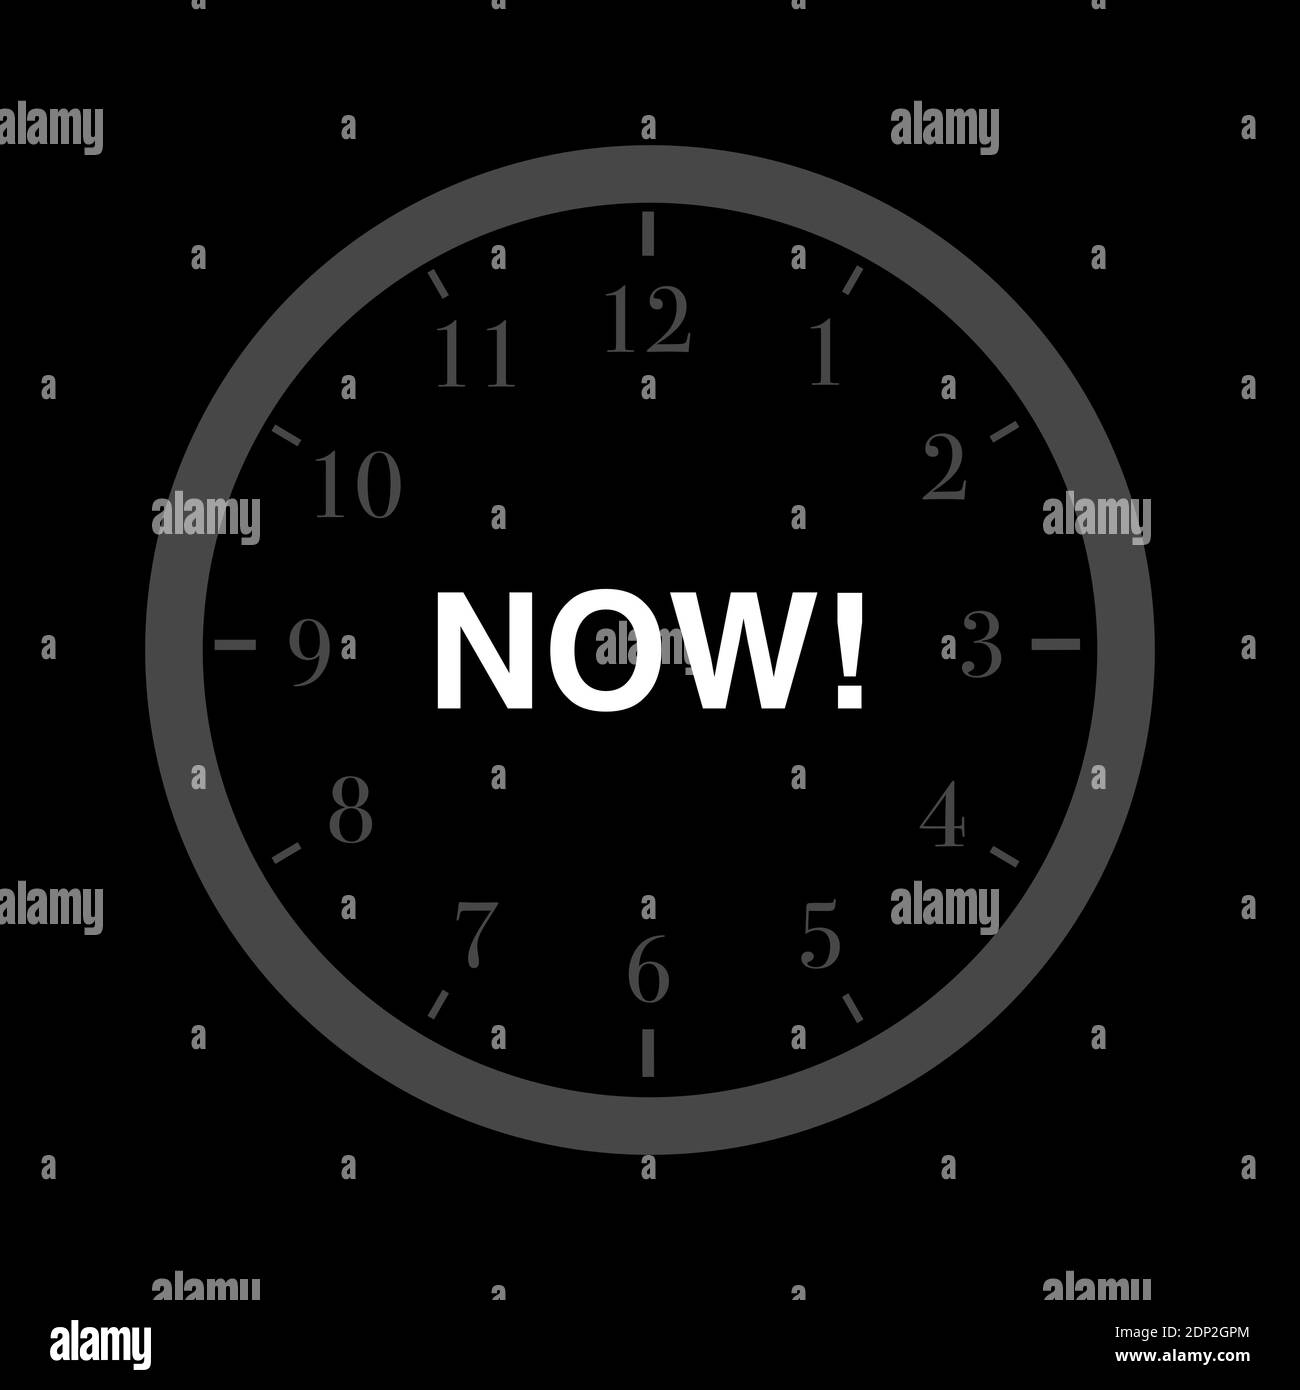 Now / At the moment - clocl dial is showing word NOW instead of time, hour, minute or second. Concept of present and current time. Vector illustration Stock Photo